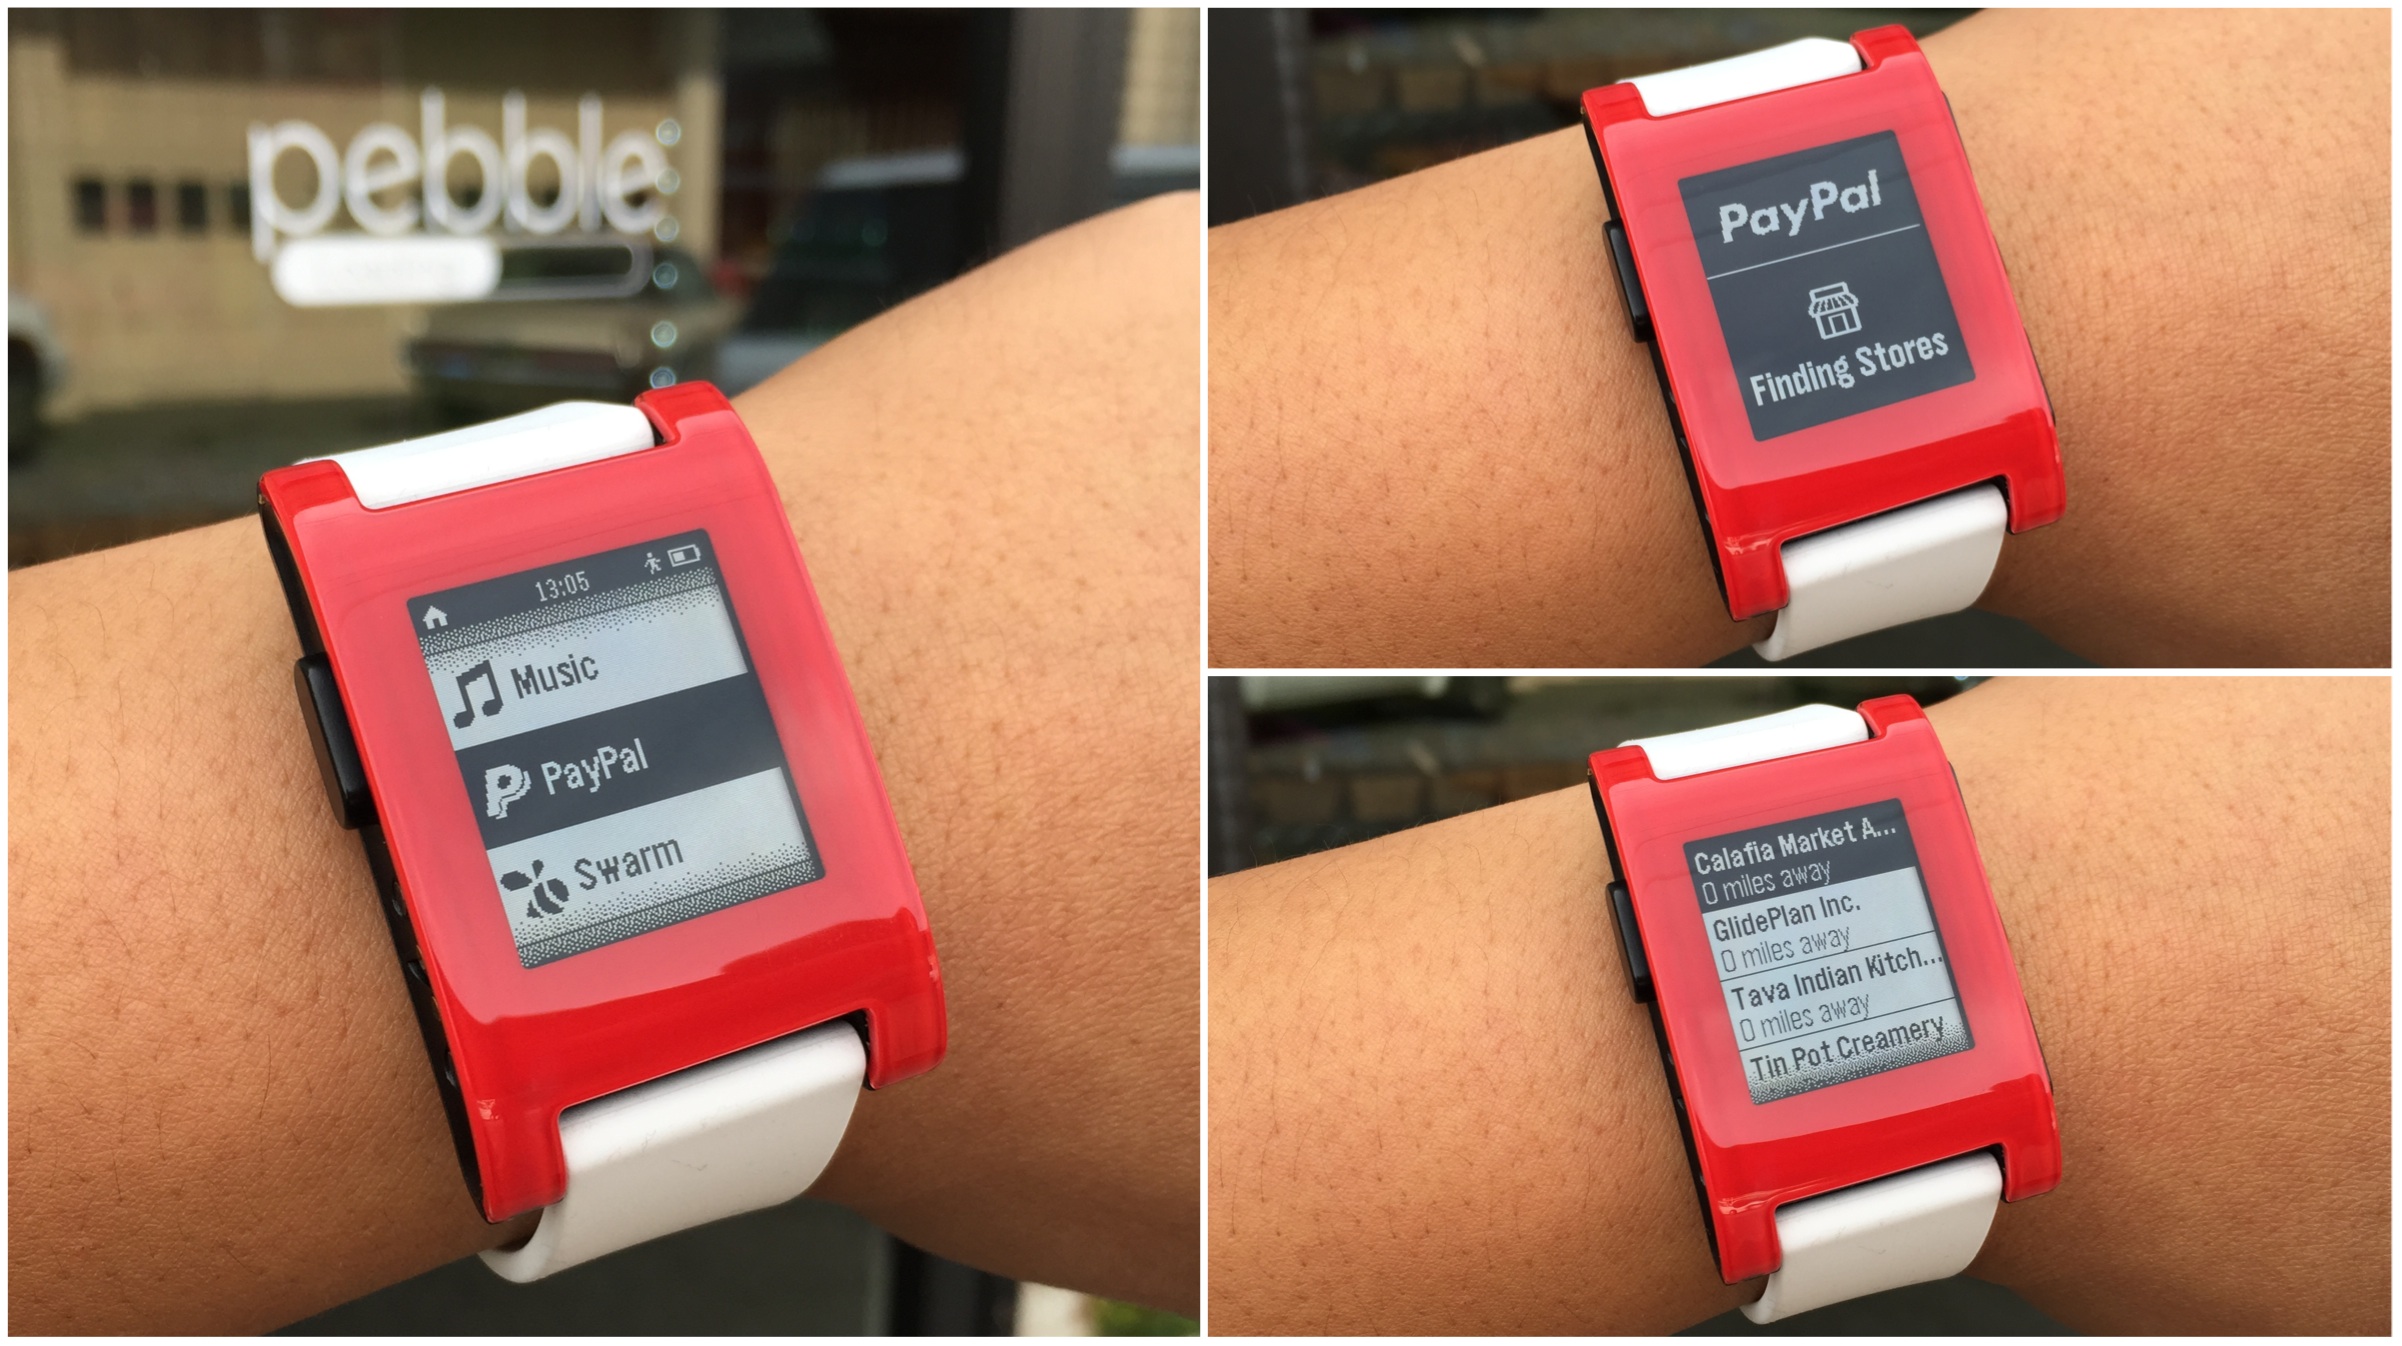 Pebble and PayPal Join Forces for Wearable Payments